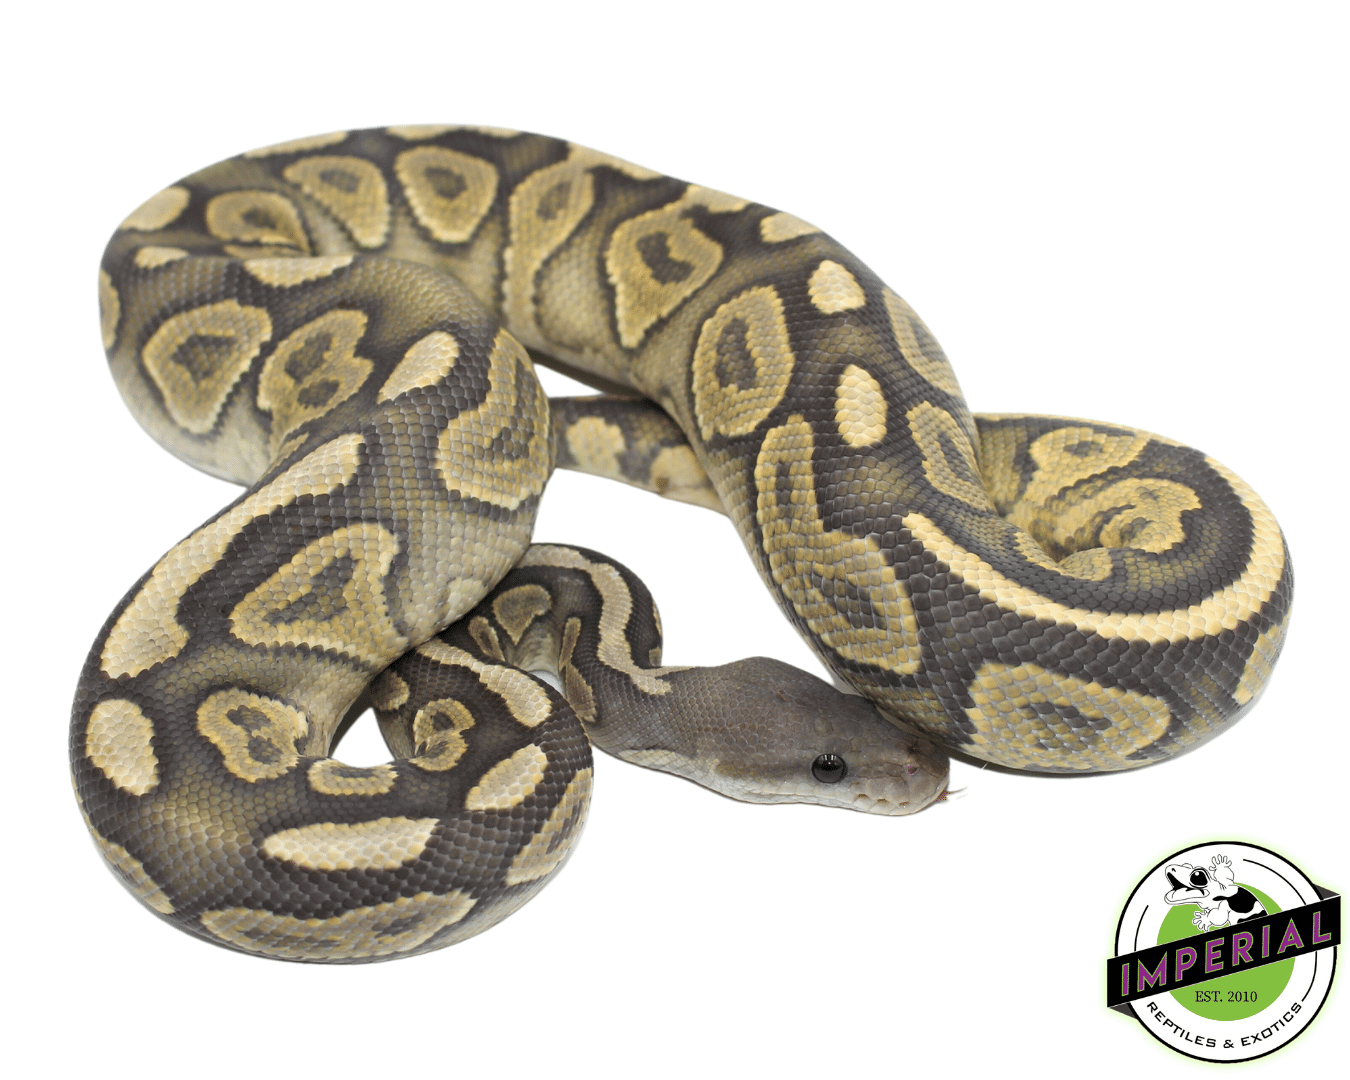 ball python for sale online at cheap prices, buy adult ball pythons near me